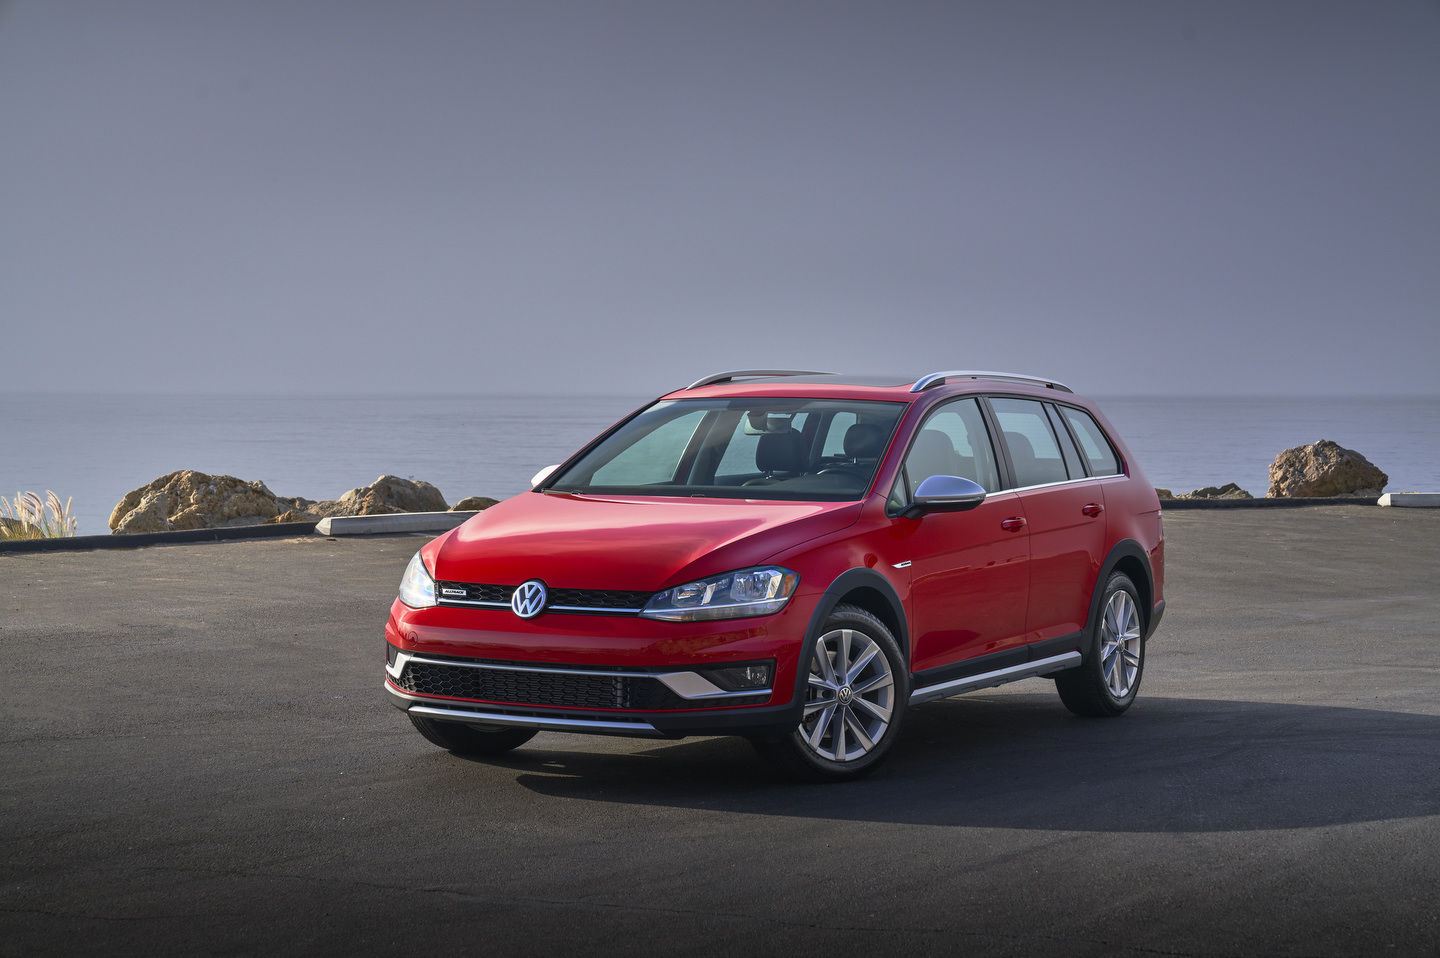 Two fuel-efficient pre-owned Volkswagen vehicles with all-wheel drive to consider